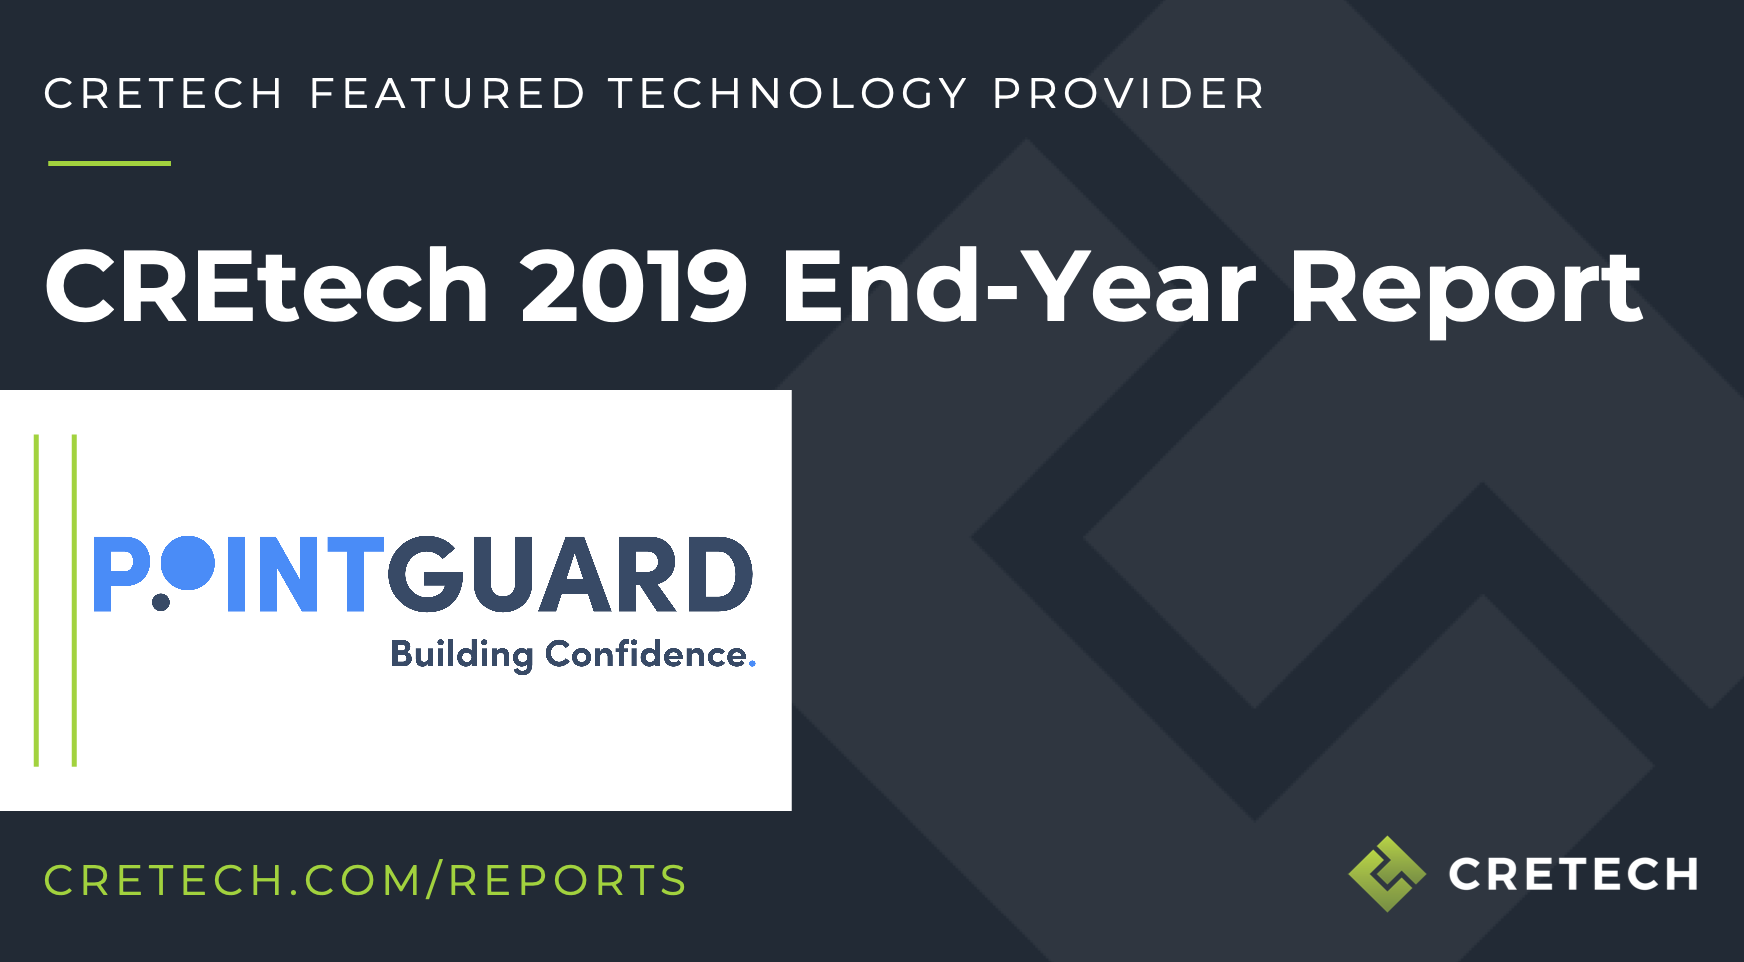 PointGuard Highlighted as Innovative Technology Provider in 2019 CREtech End-Year Report